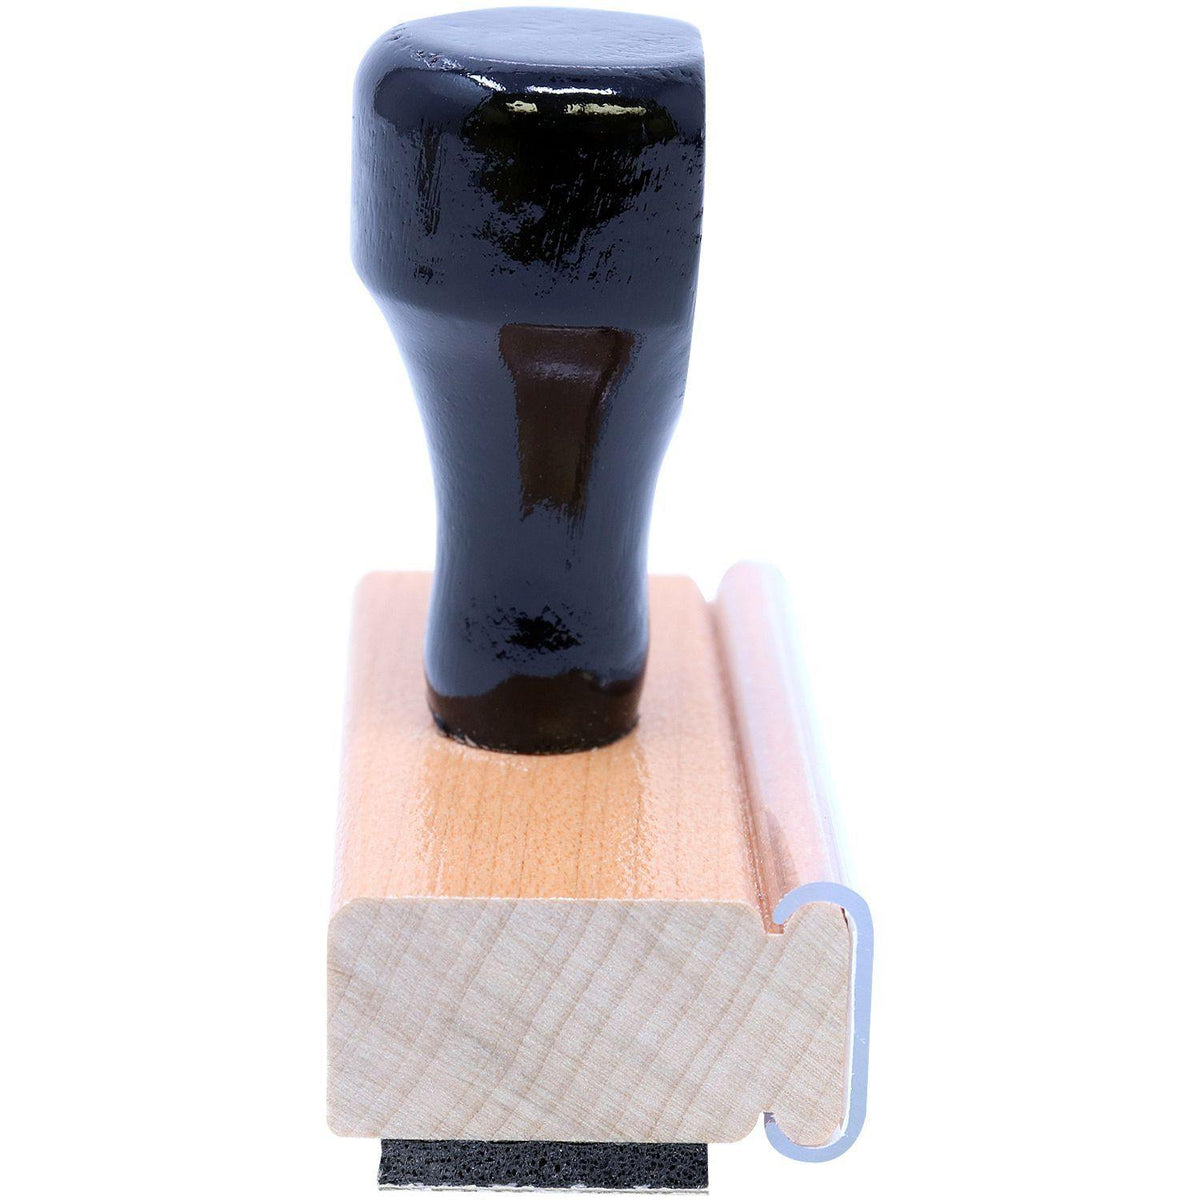 Name Rubber Stamp - Engineer Seal Stamps - Brand_Acorn, Impression Size_Small, Stamp Type_Regular Stamp, Type of Use_Teacher